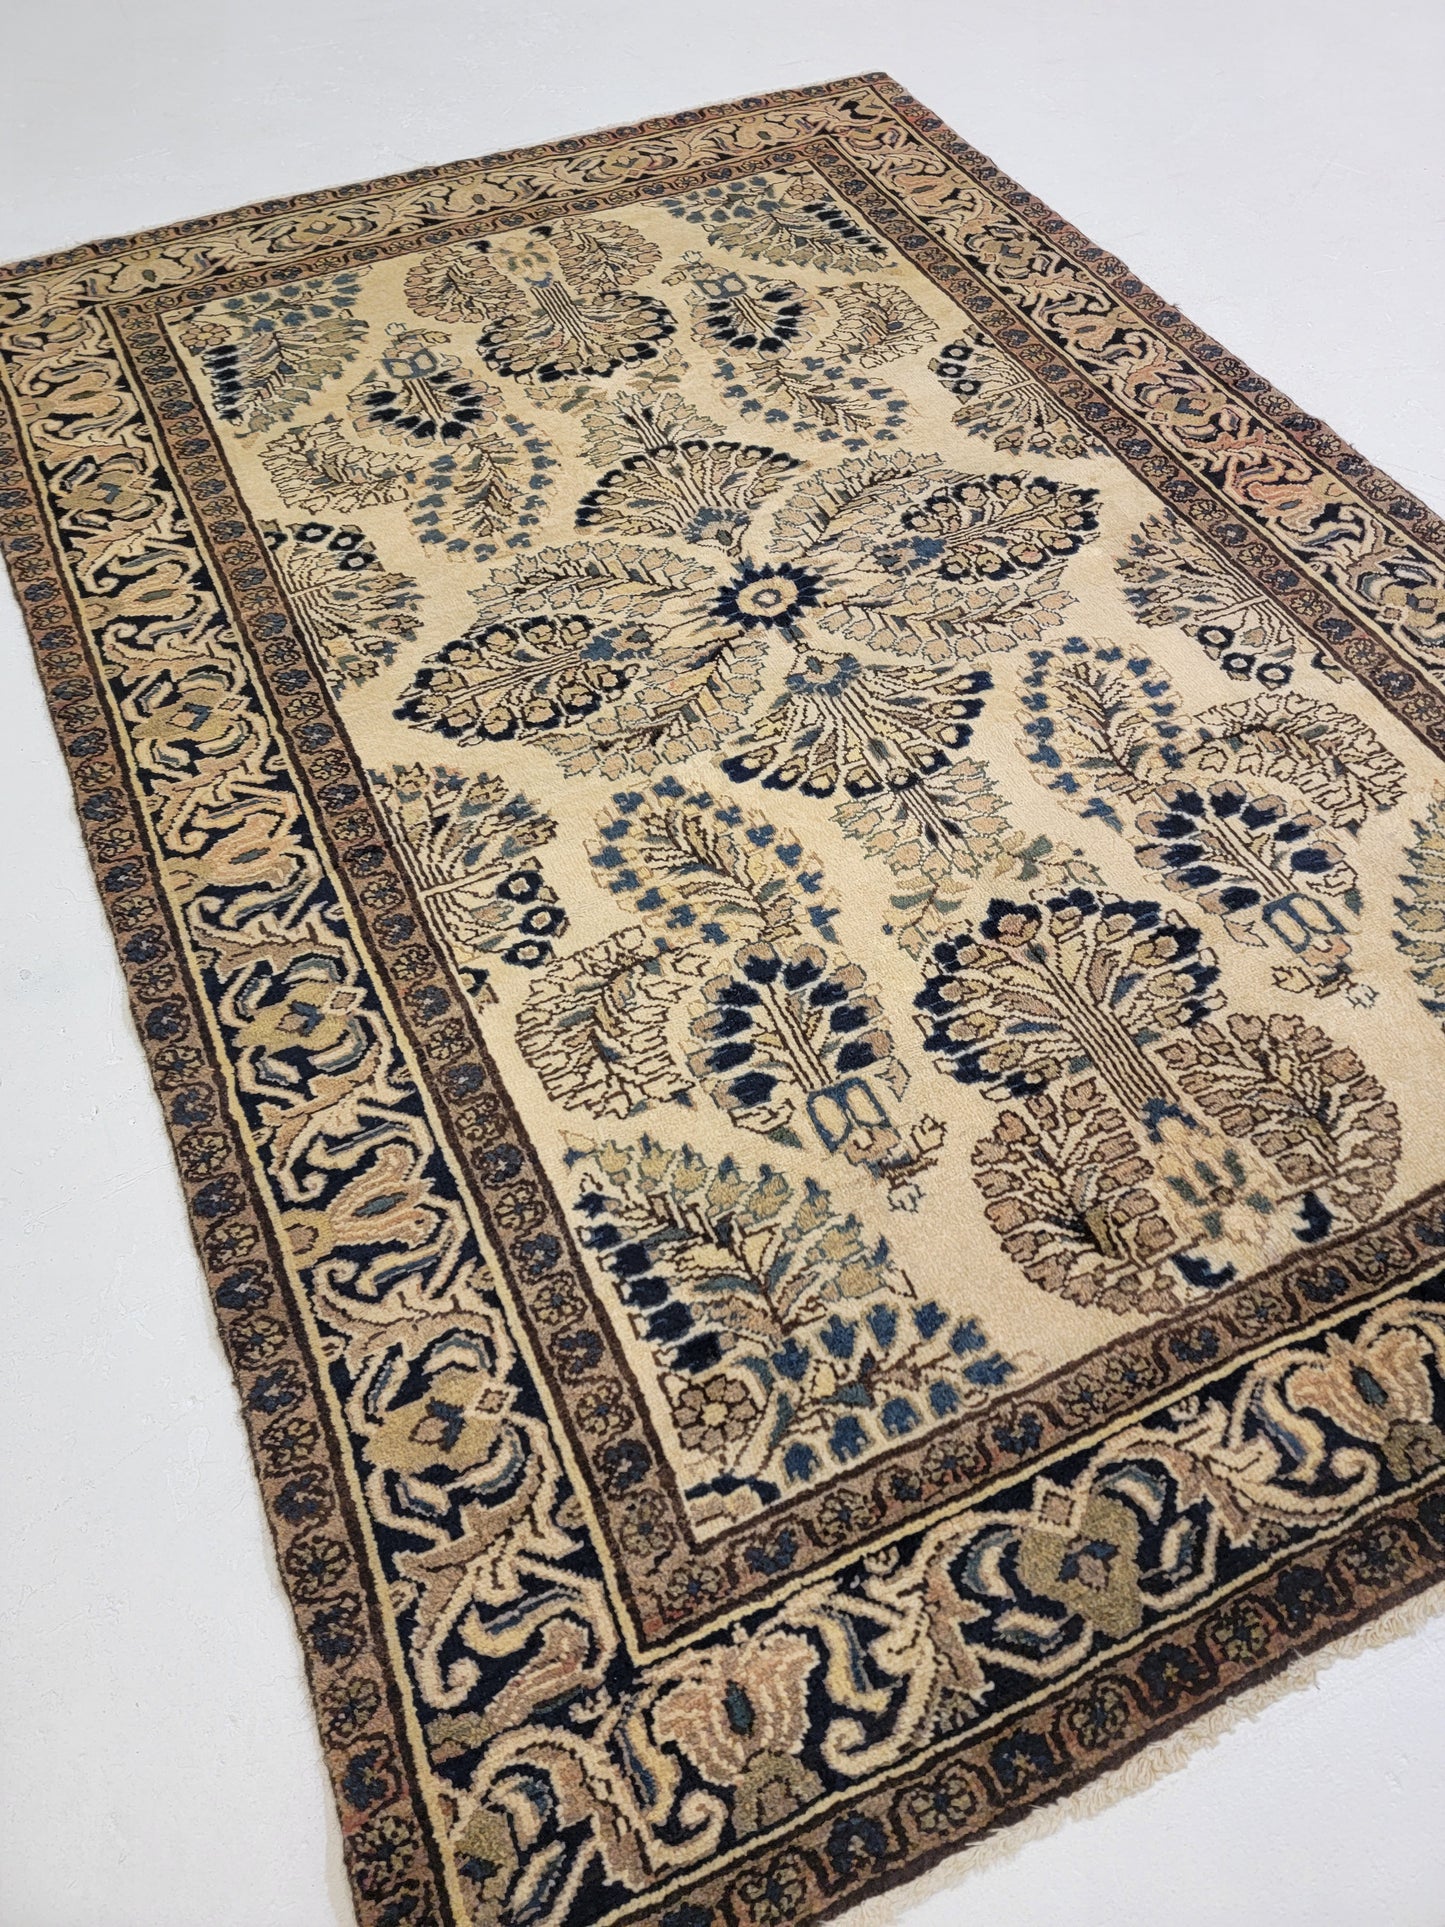 Antique Hand-Knotted Wool Area Rug Armenian Lillian 4'3" x 6'4"